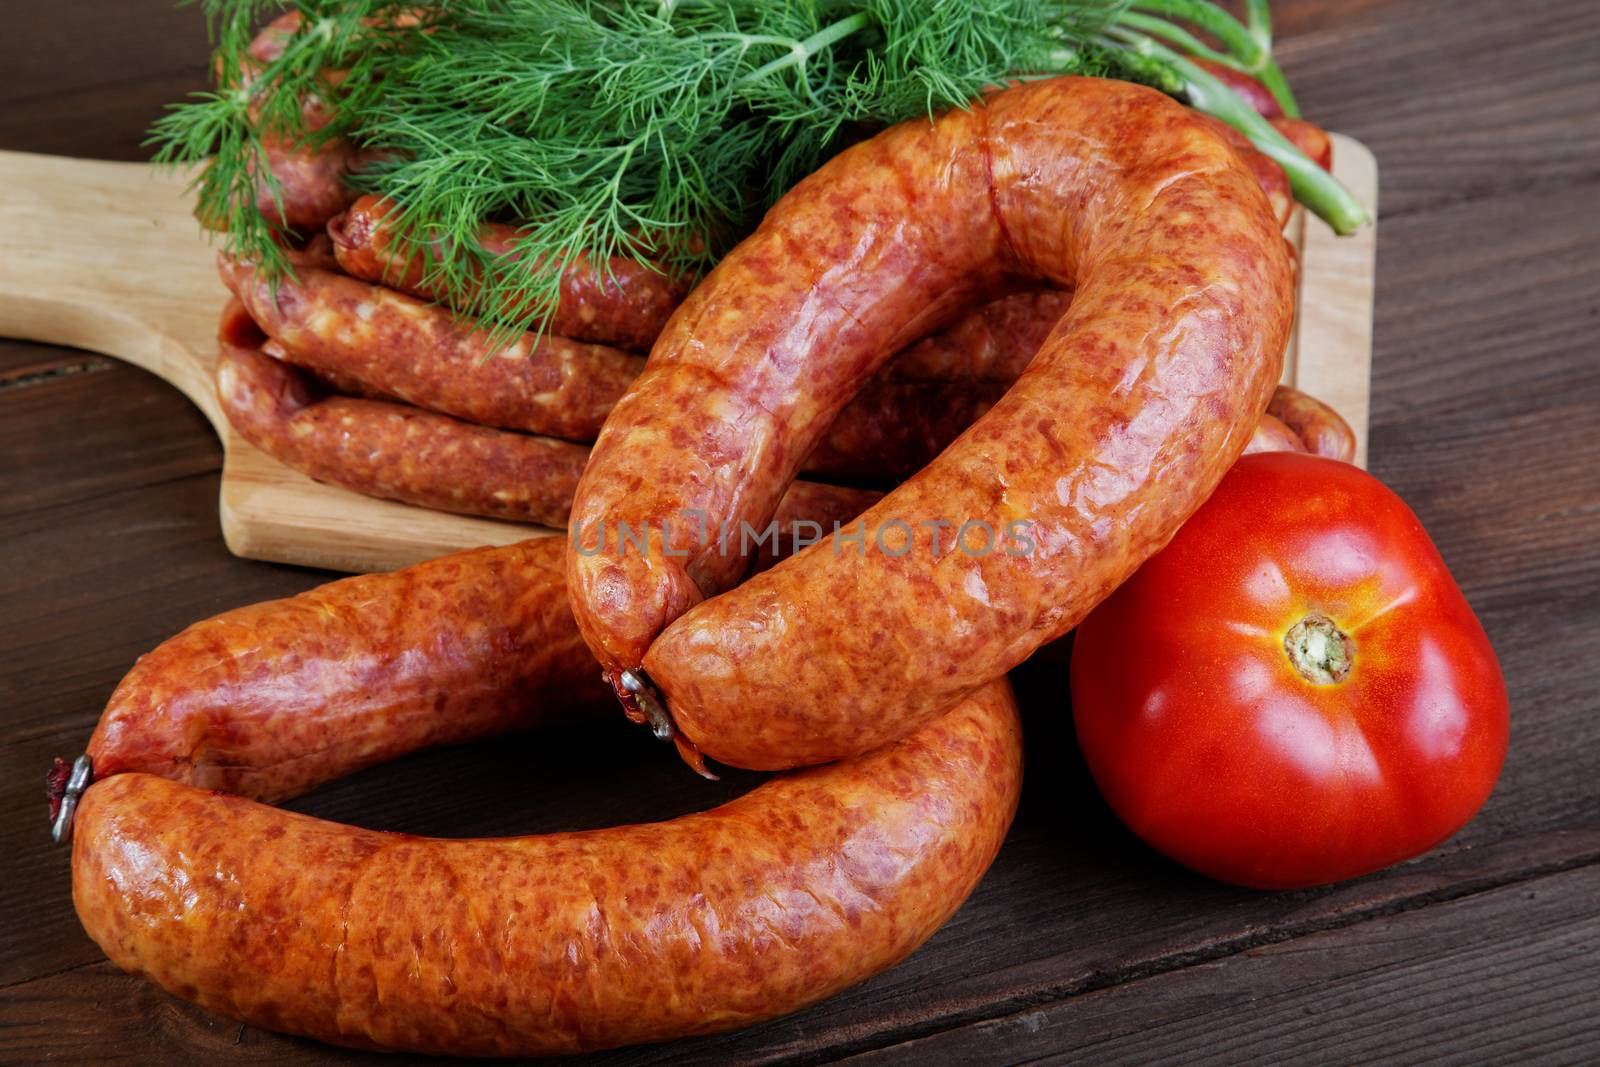 Smoked sausage on a kitchen table by alarich